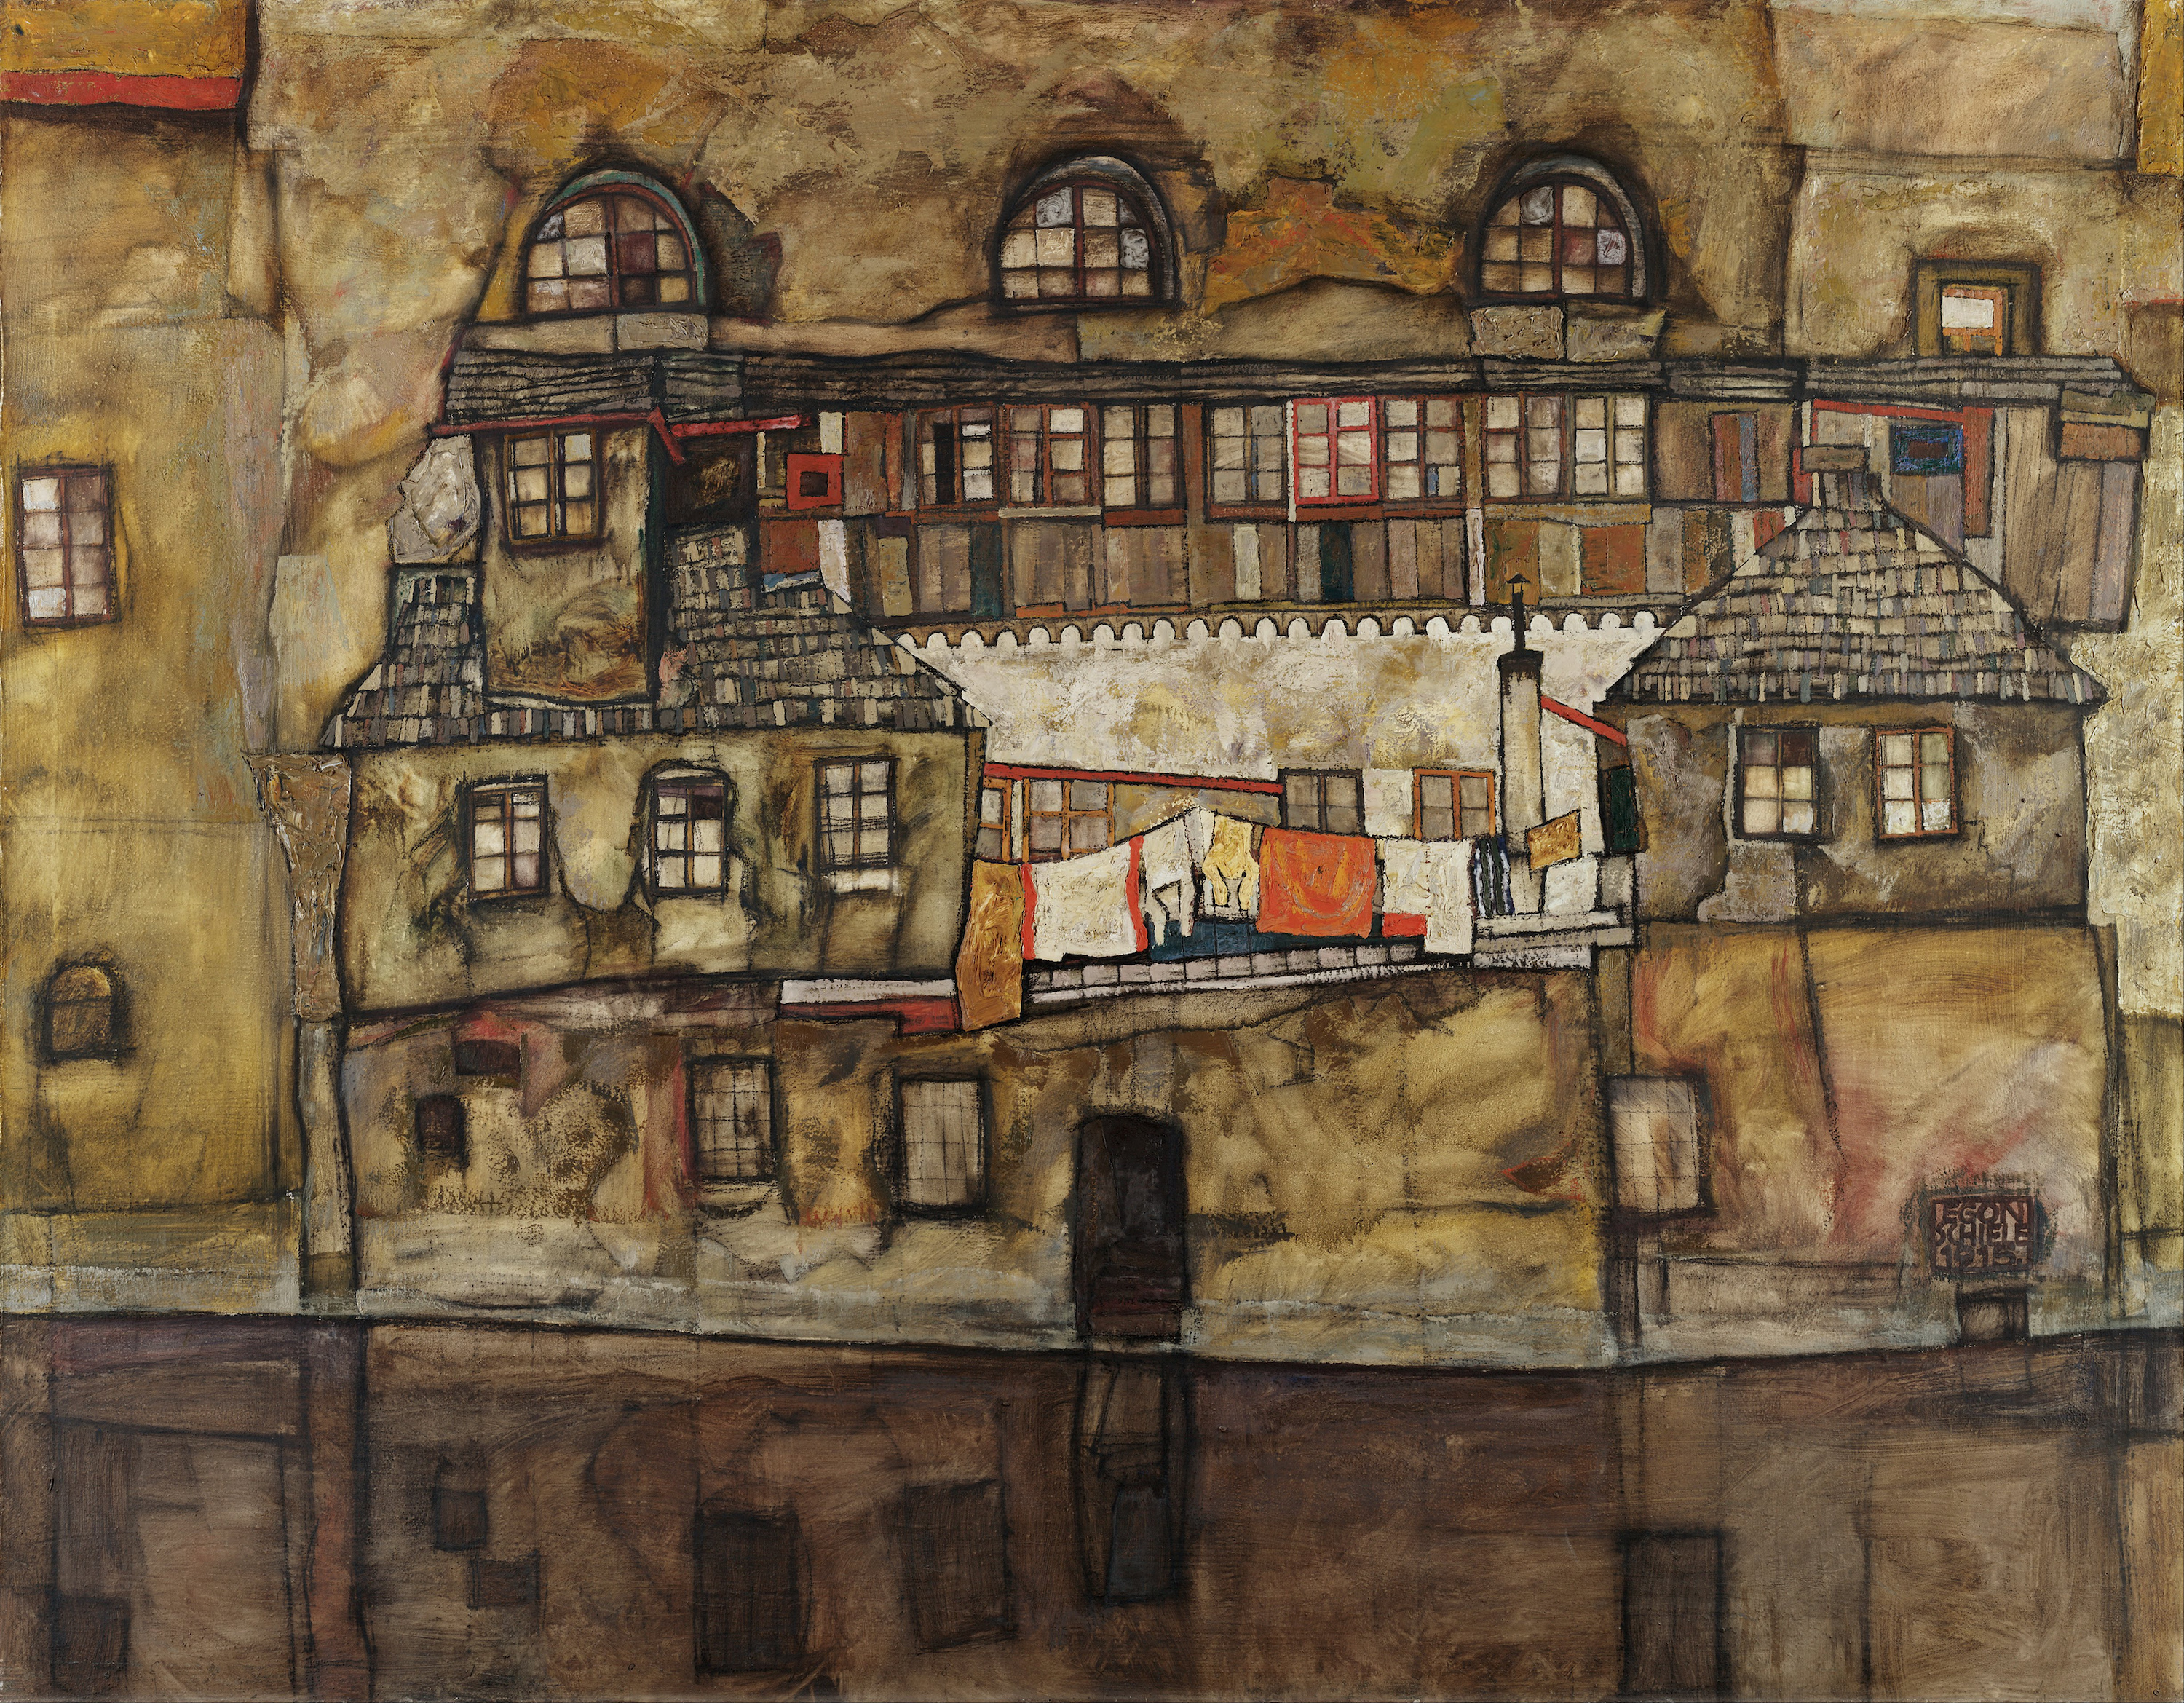 House on a River by Egon Schiele - 1915 - 109.5 x 140 cm Leopold Museum